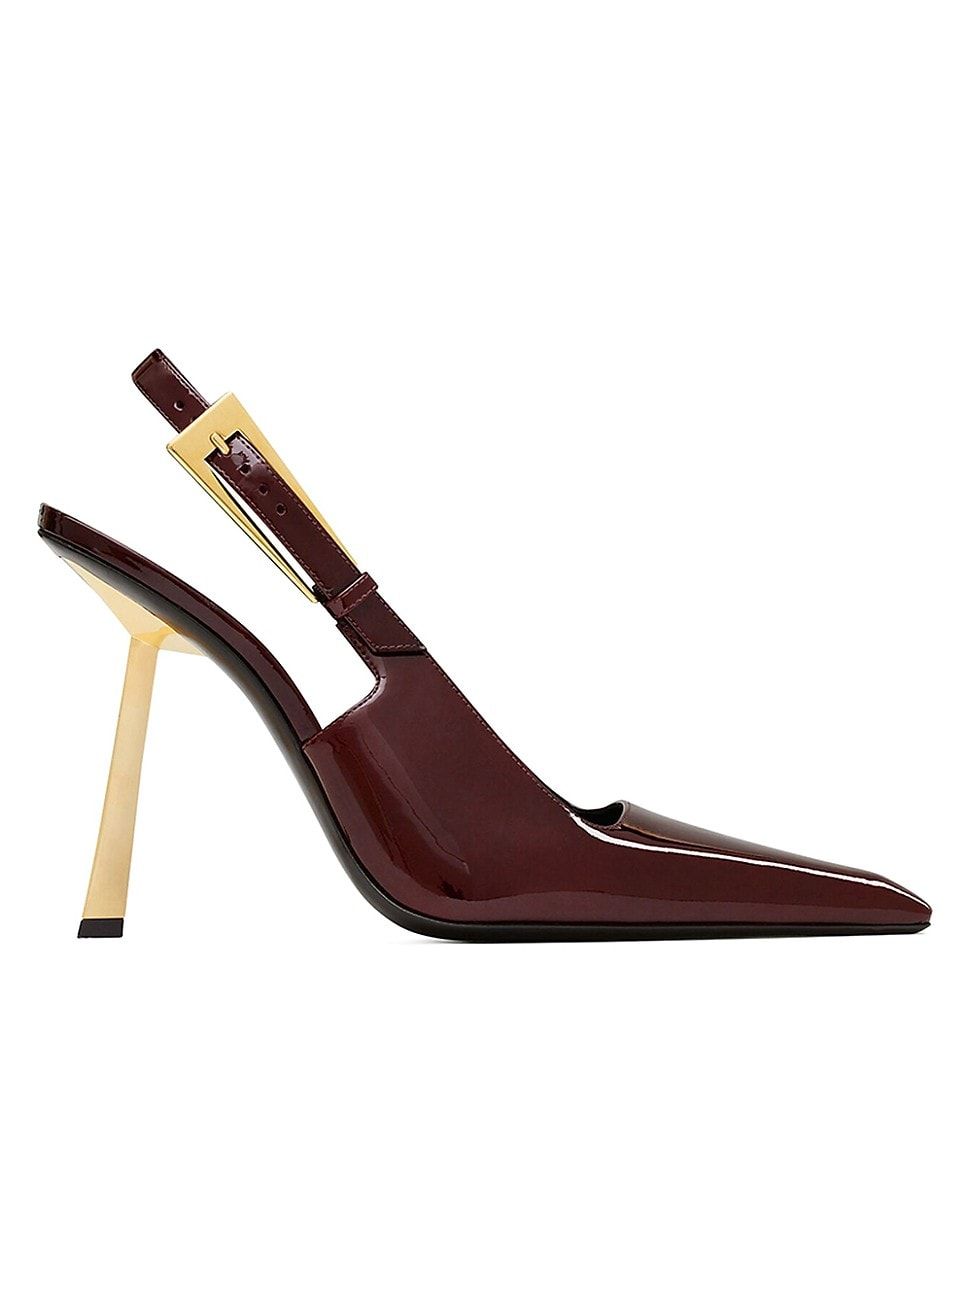 Women's Lee Slingback Pumps In Patent Leather - Marron Glace - Size 4.5 | Saks Fifth Avenue